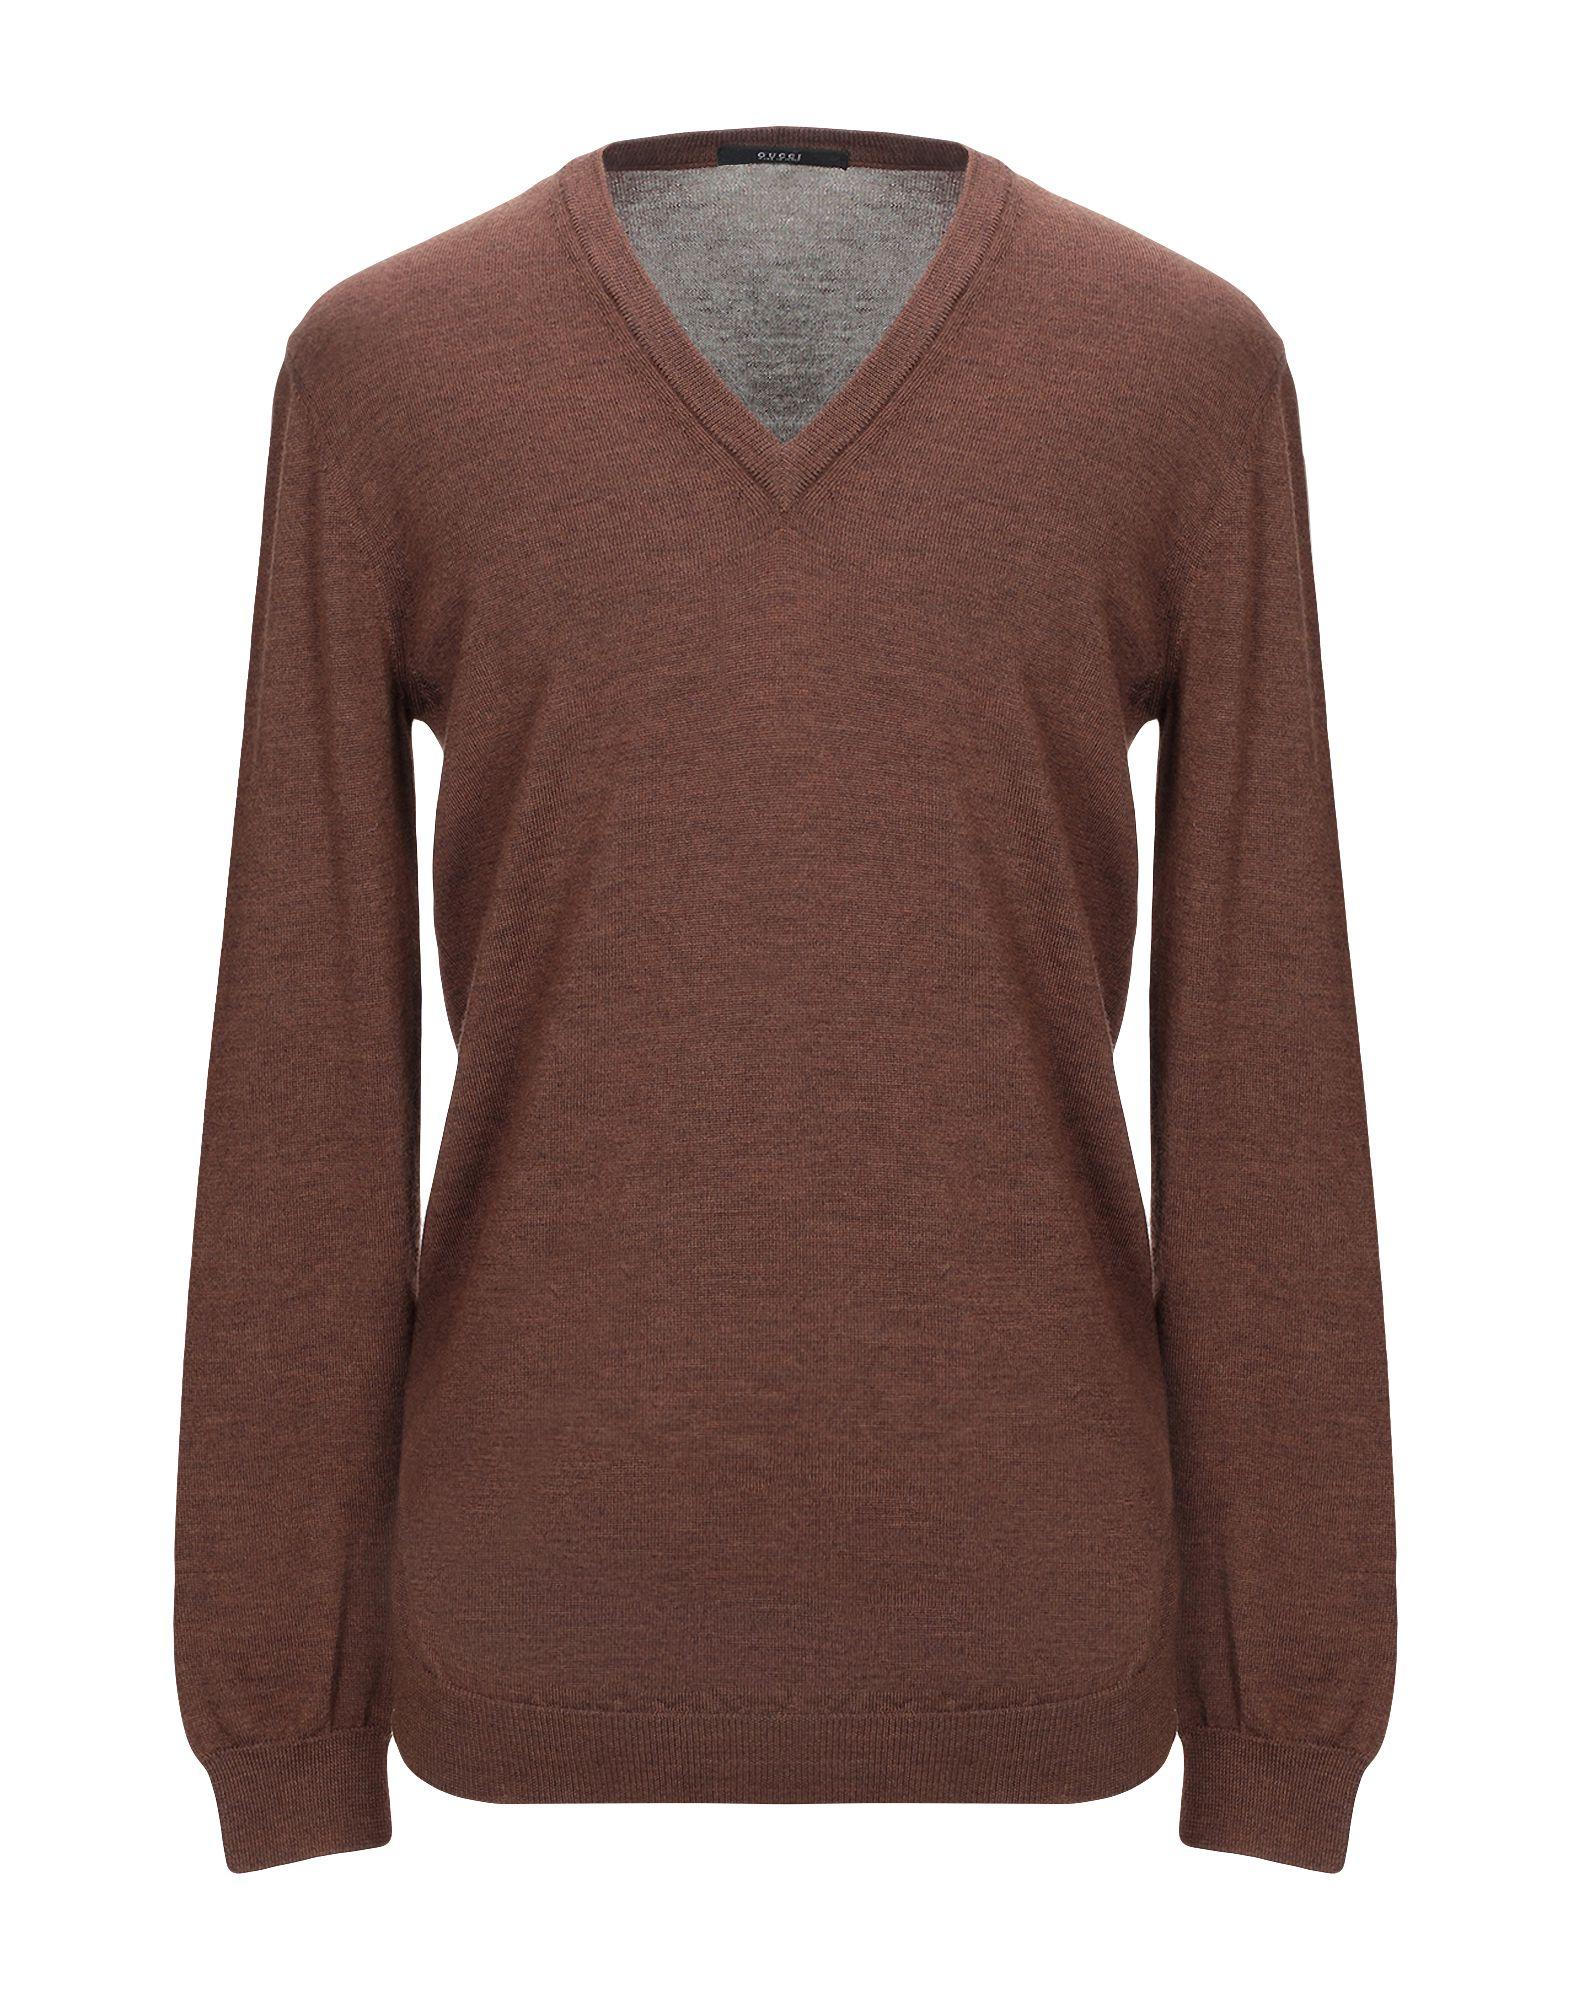 Gucci Sweater in Brown for Men - Lyst